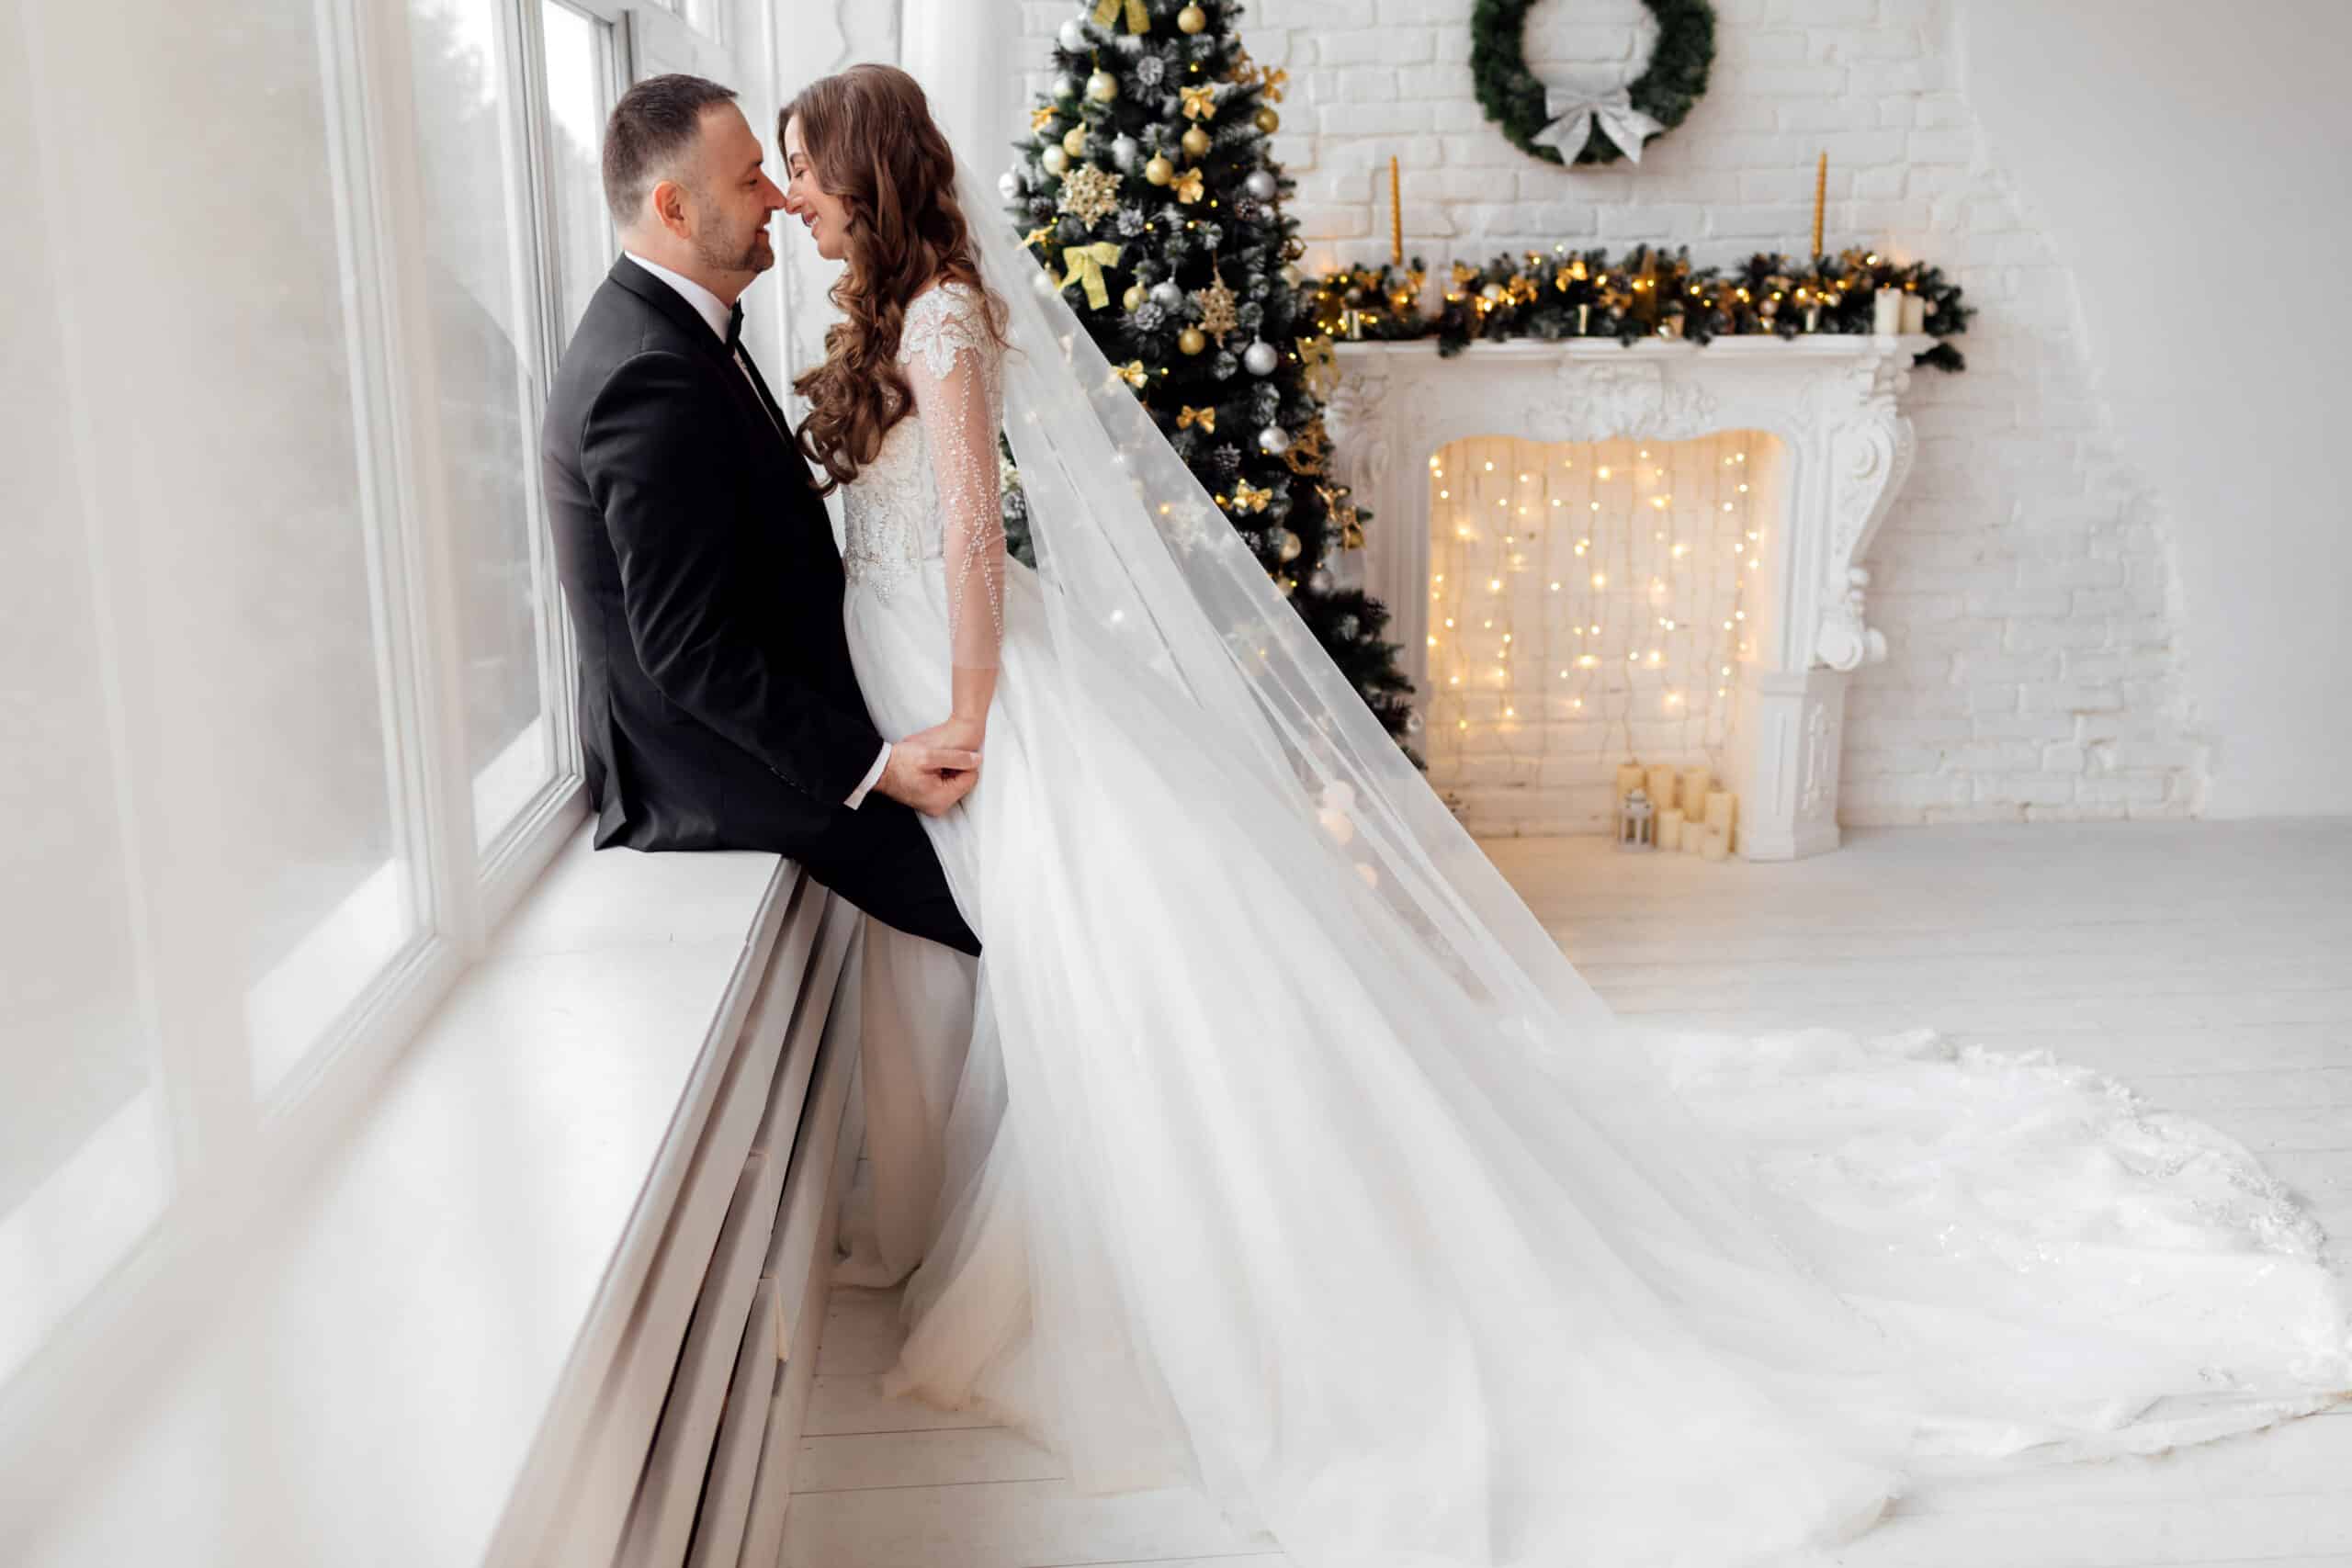 Bride and groom pose in front of a Christmas tree at their wedding